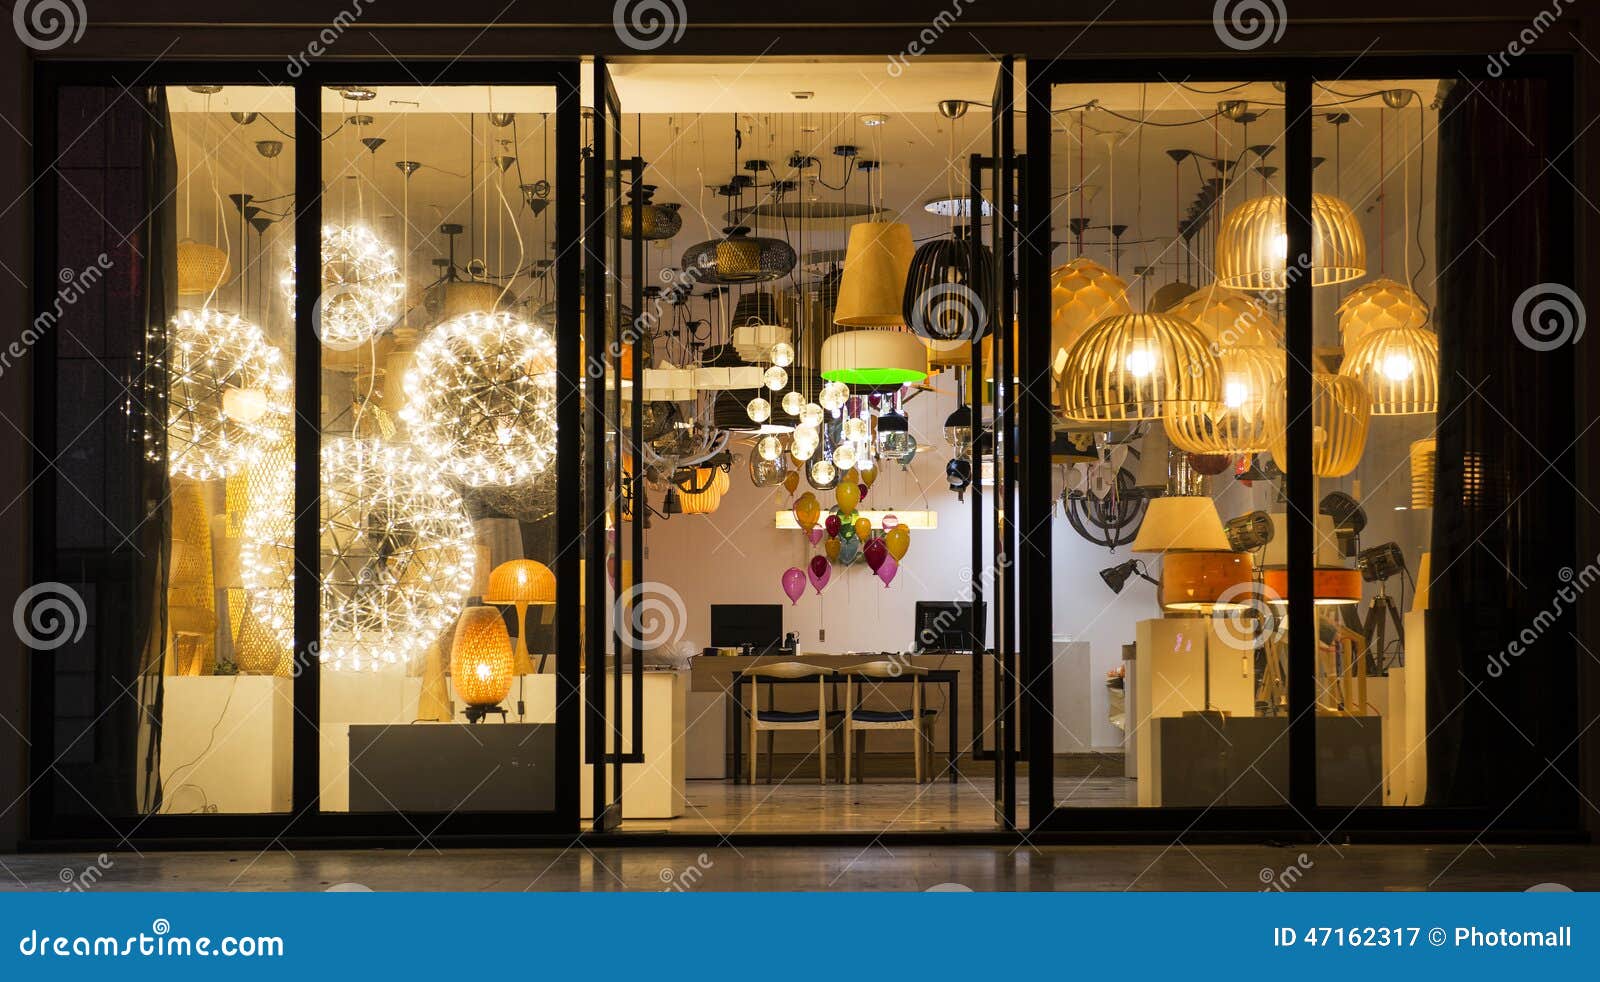 a variety of lighting in a lighting shop,commercial lighting, home furnishing lighting